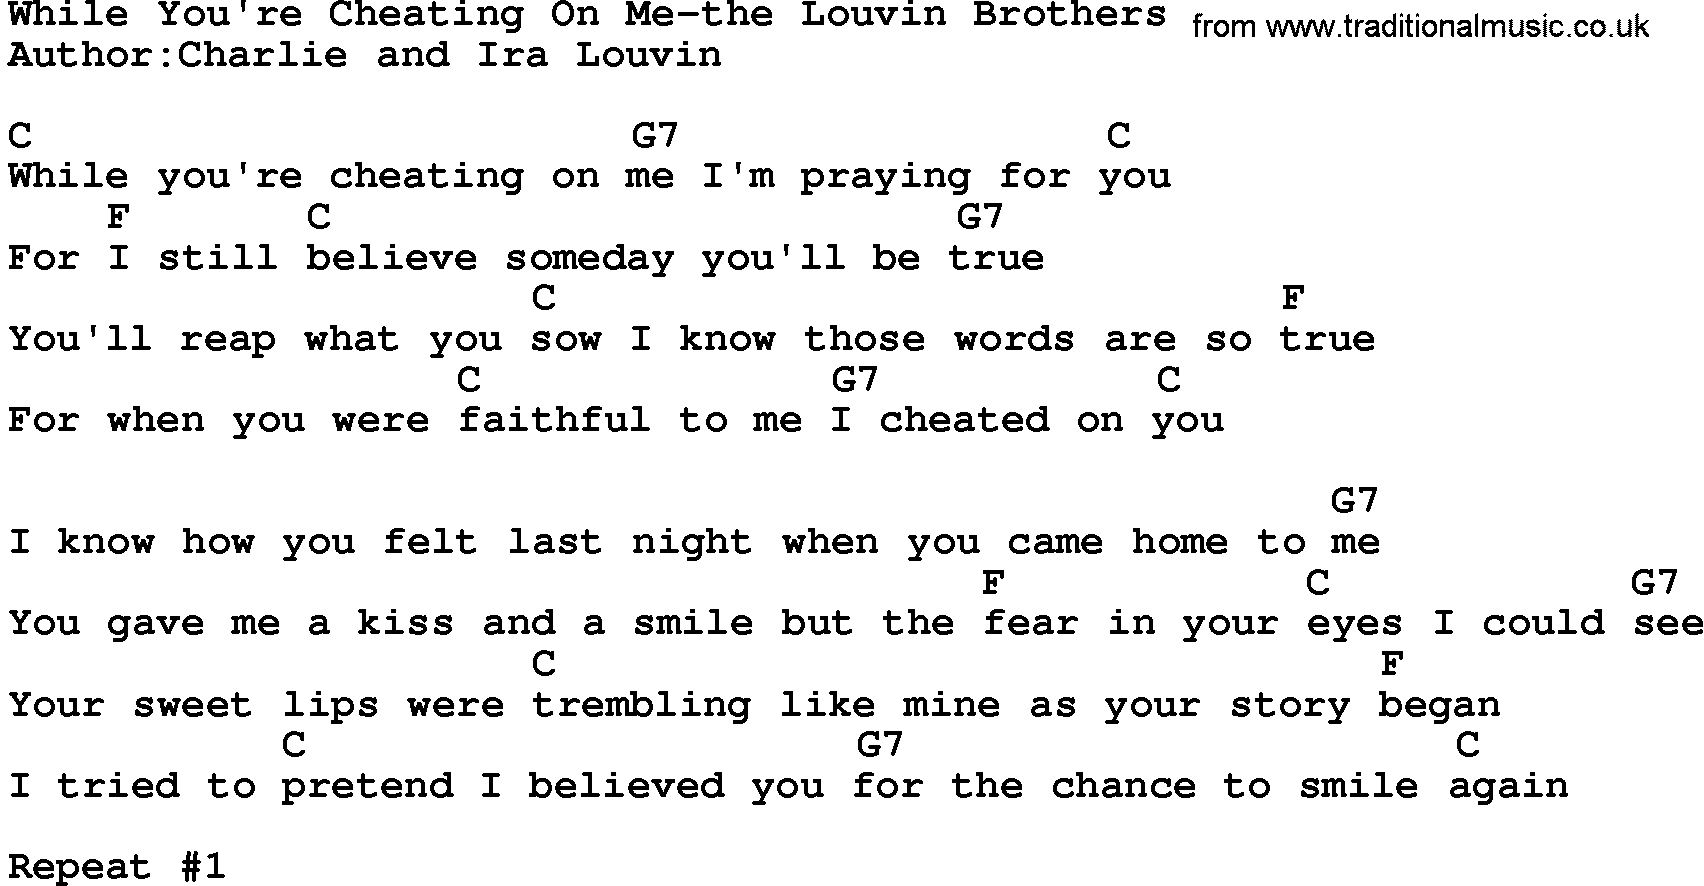 Country music song: While You're Cheating On Me-The Louvin Brothers lyrics and chords